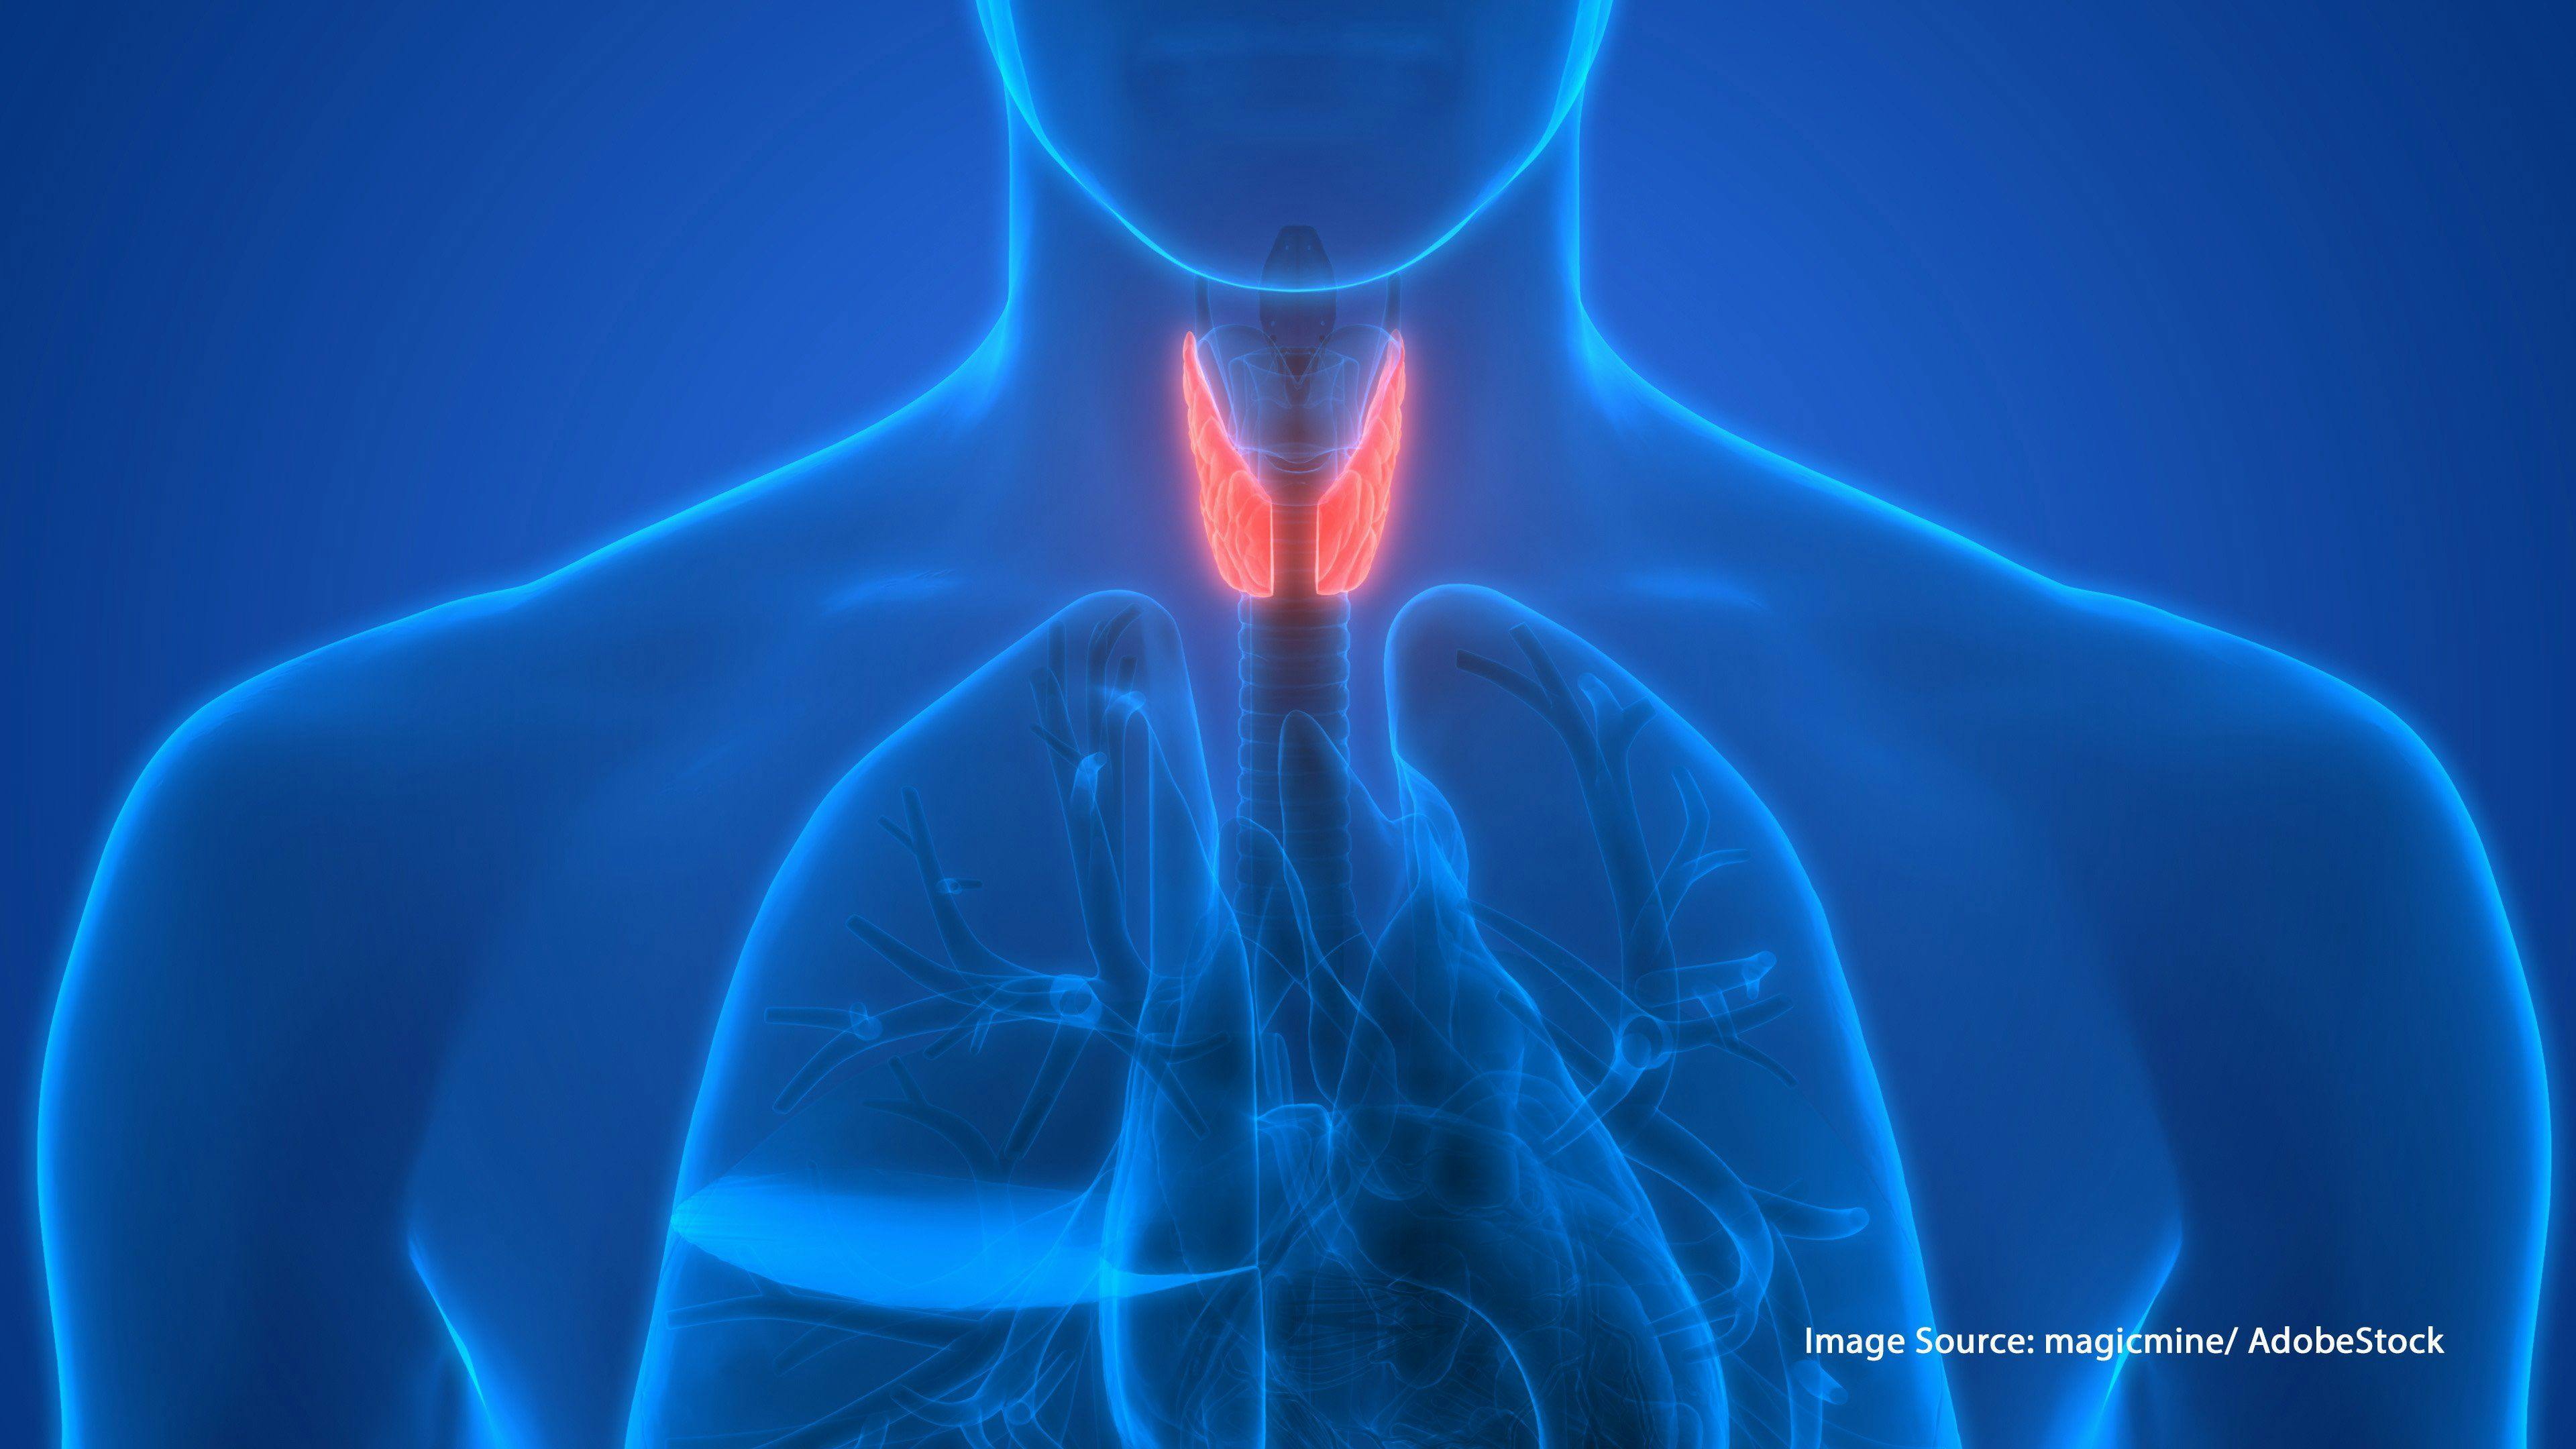 Inaccurate Risk Perceptions Lead to Worry and Decreased QOL in Patients with Thyroid Cancer